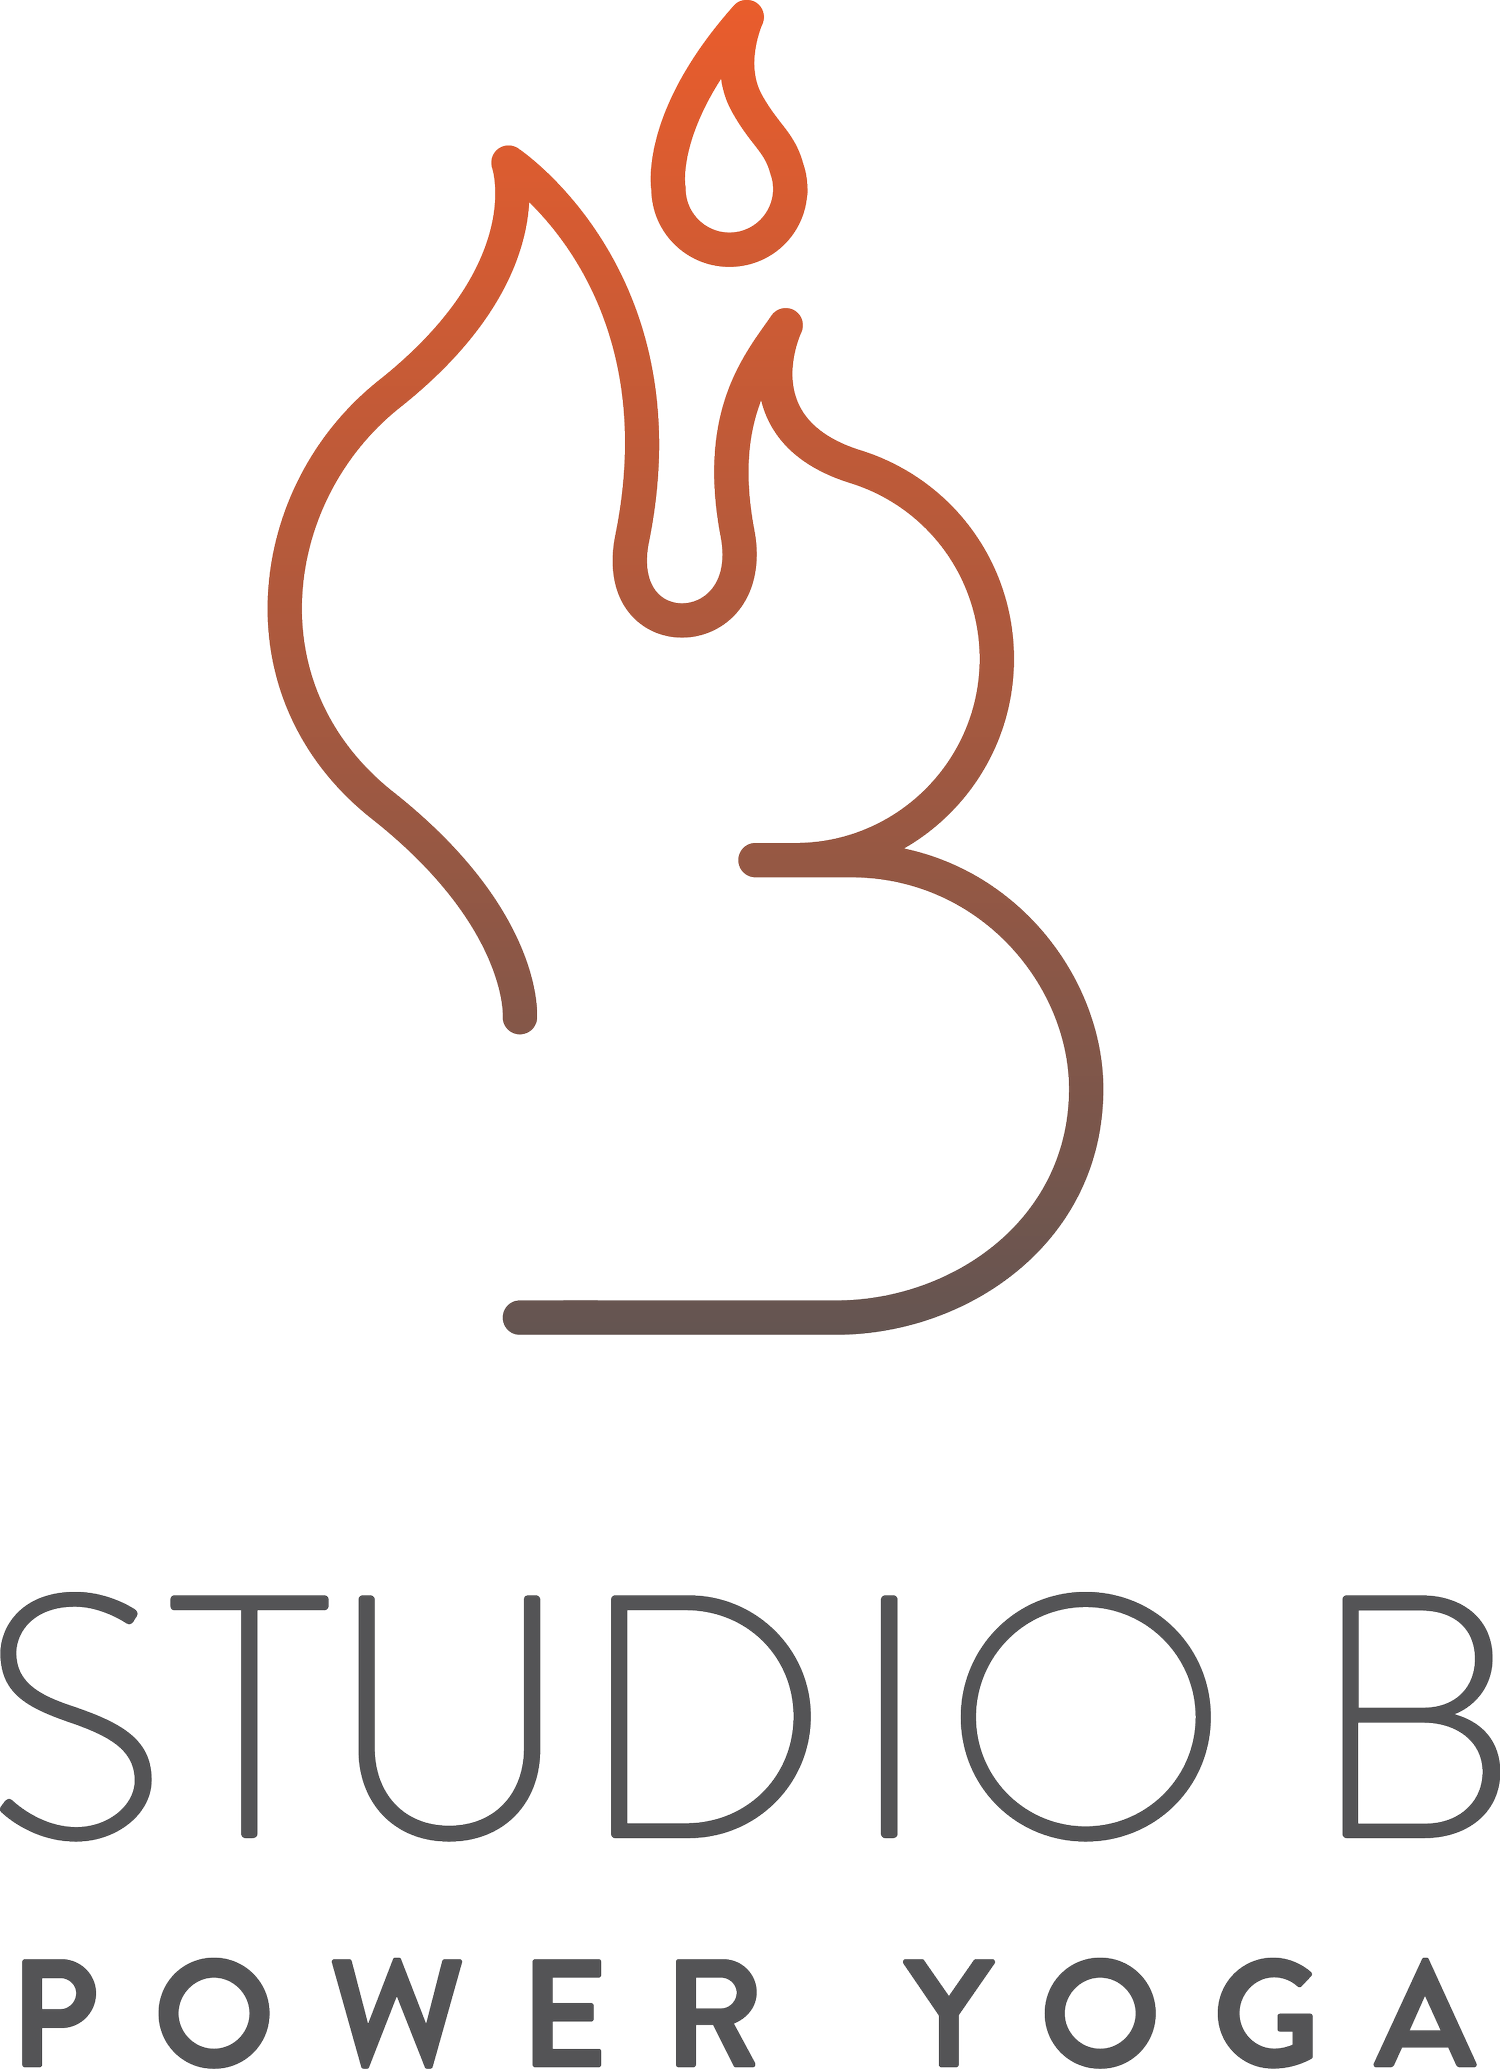 Studio B Power Yoga focuses on hot yoga with a vinyasa flow. Located in  Linglestown, PA just outside of Harrisburg and Hershey.